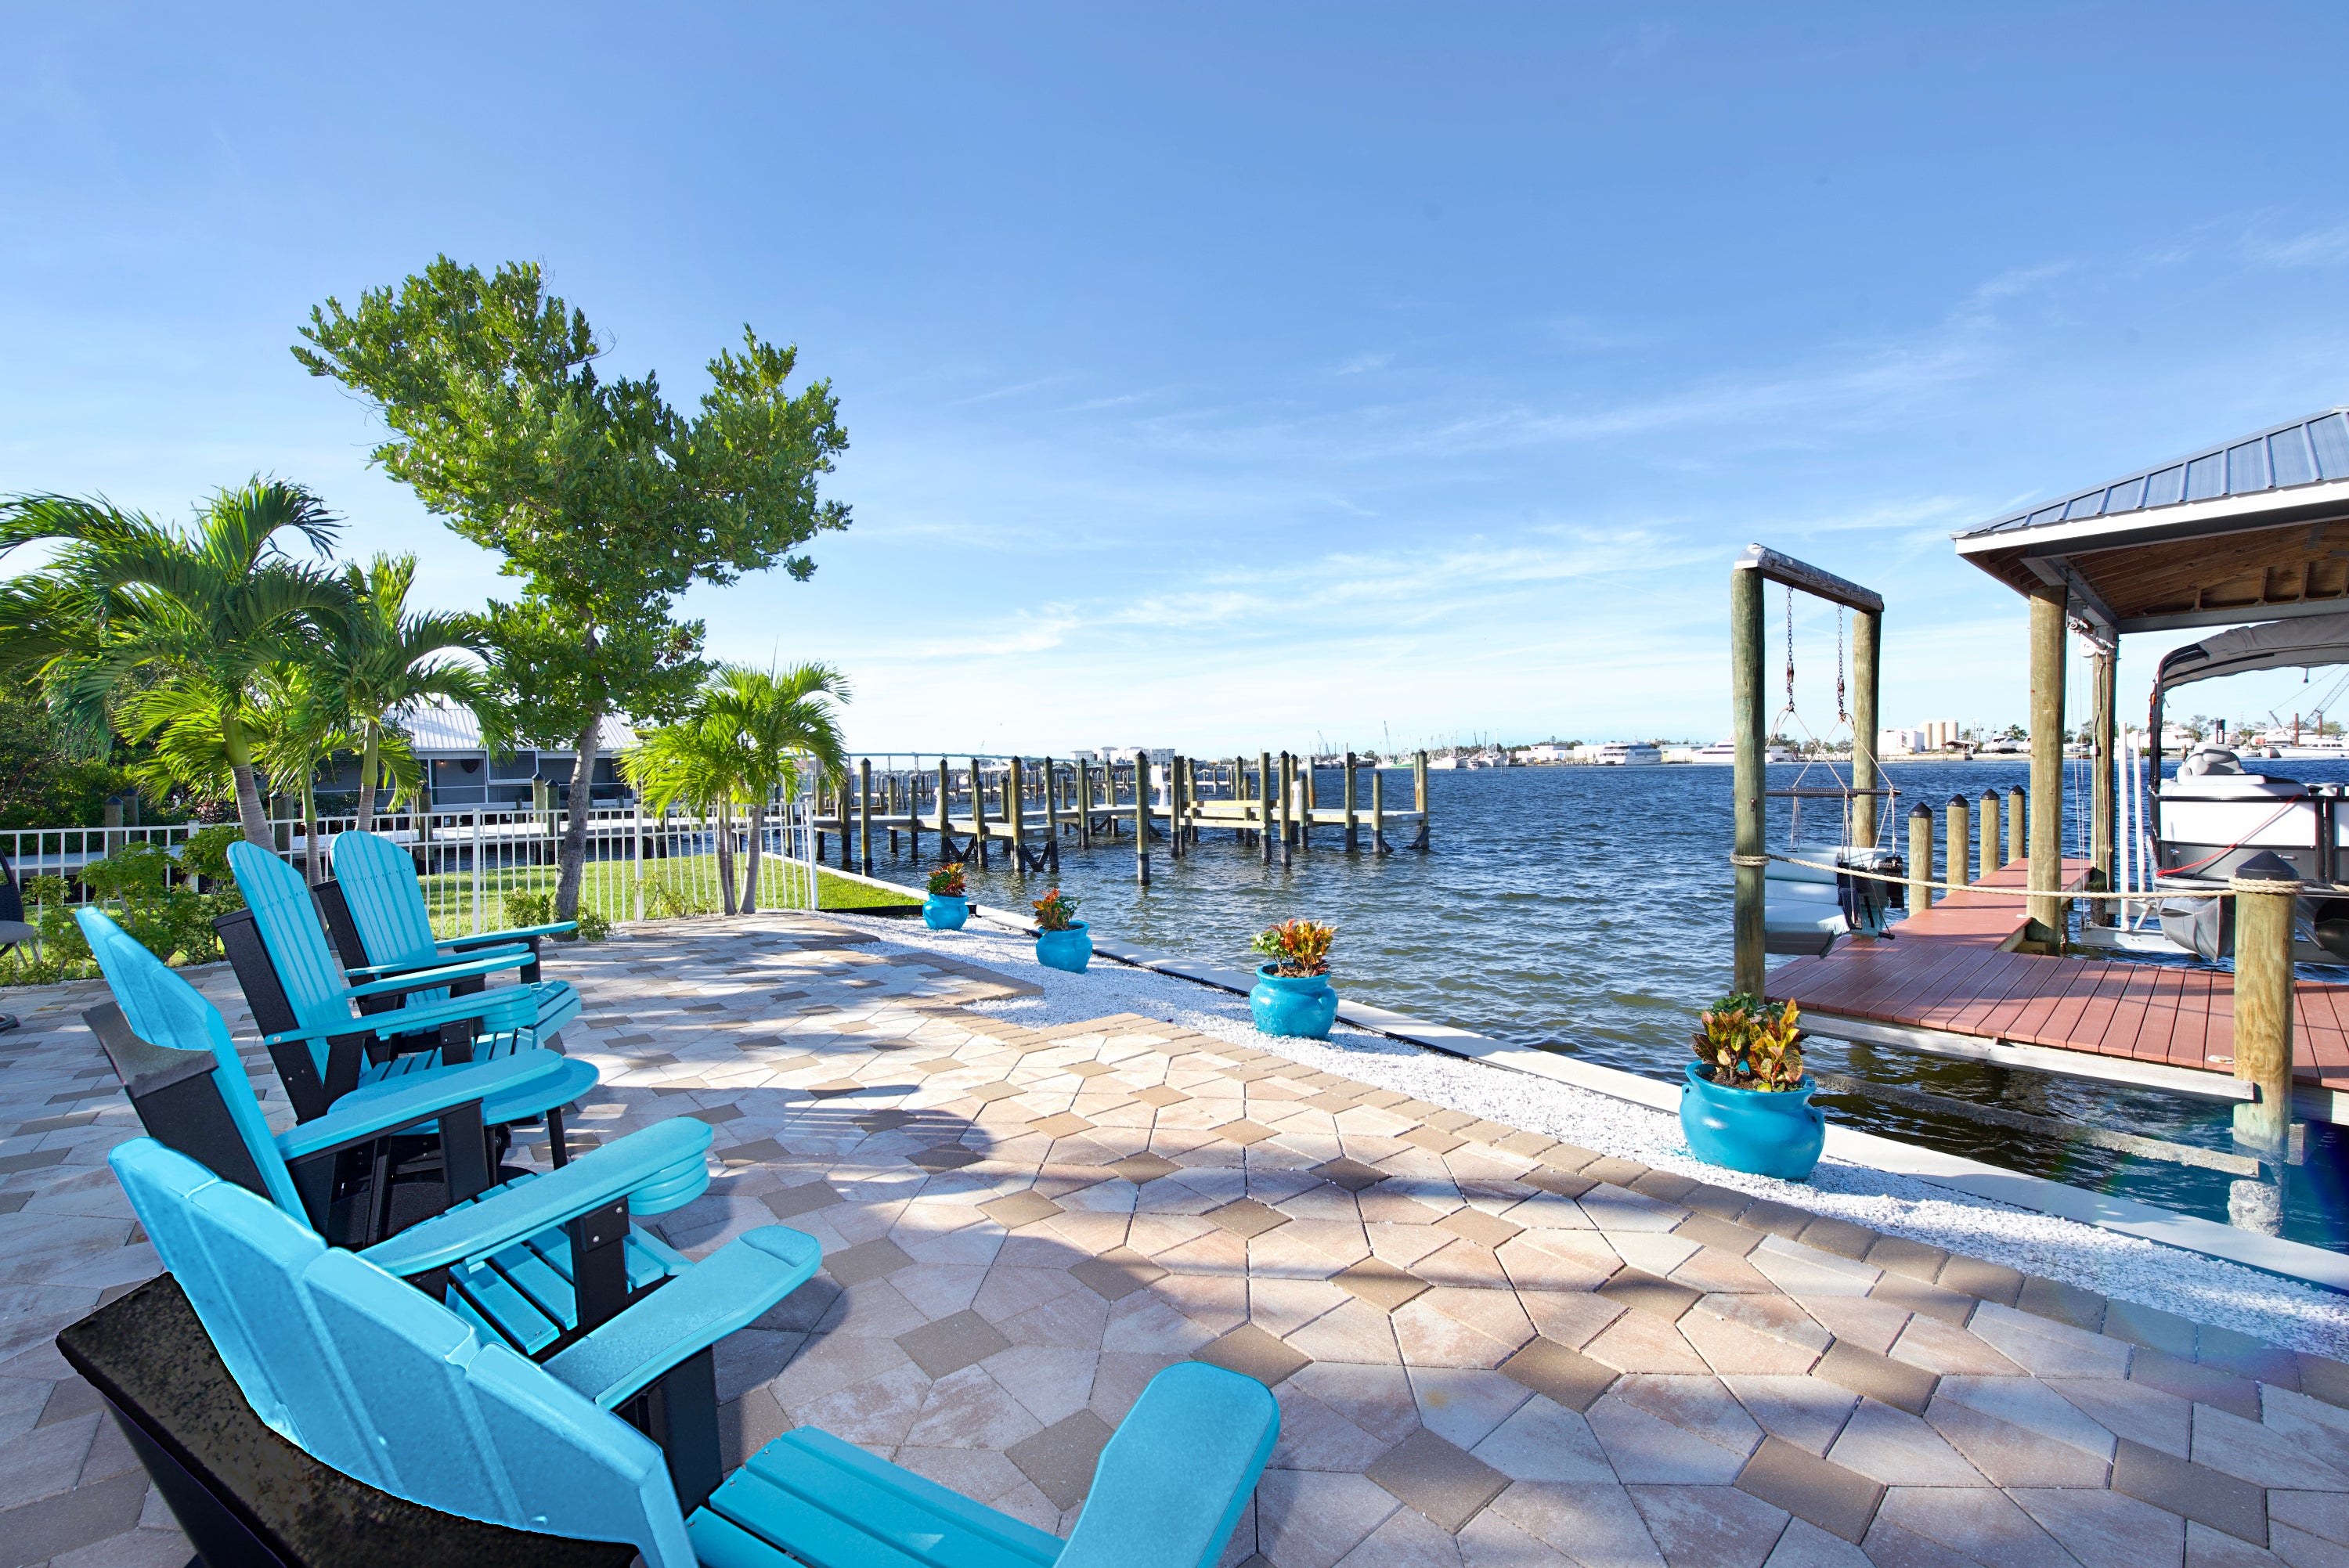 Patio Area by the Bay